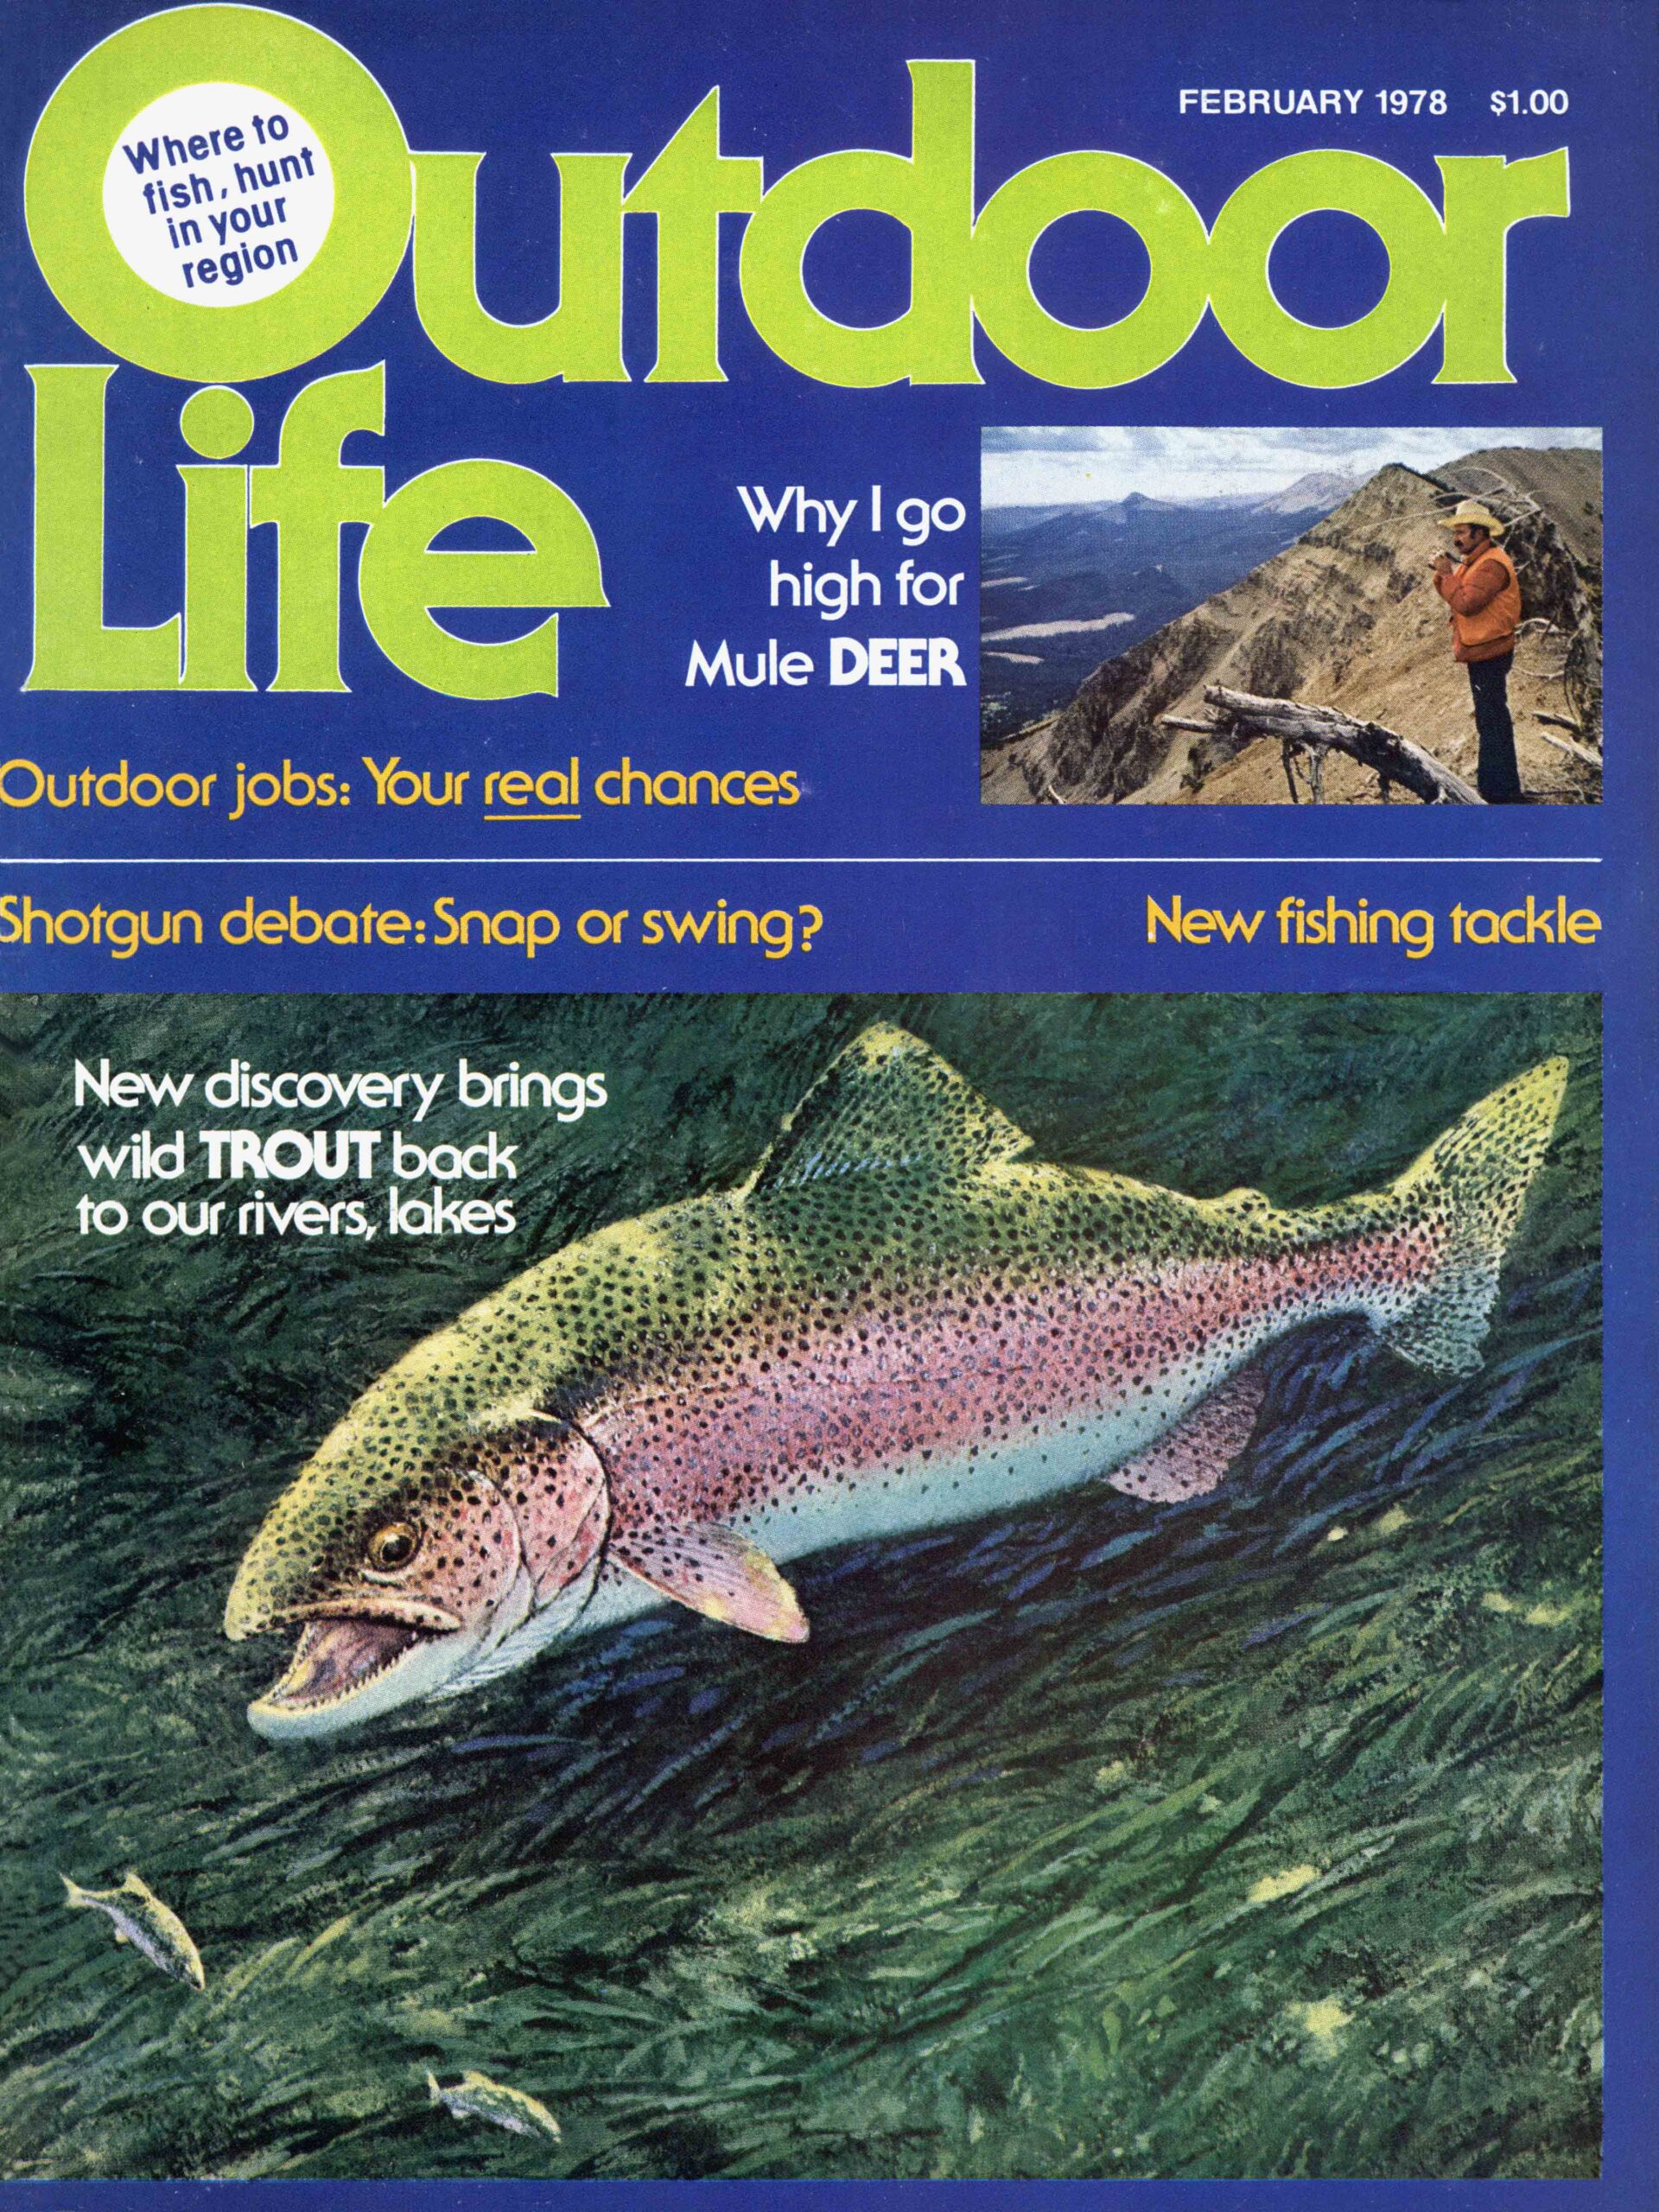 February 1978 cover of Outdoor Life magazine features a fish painting and a photo of a hunter.